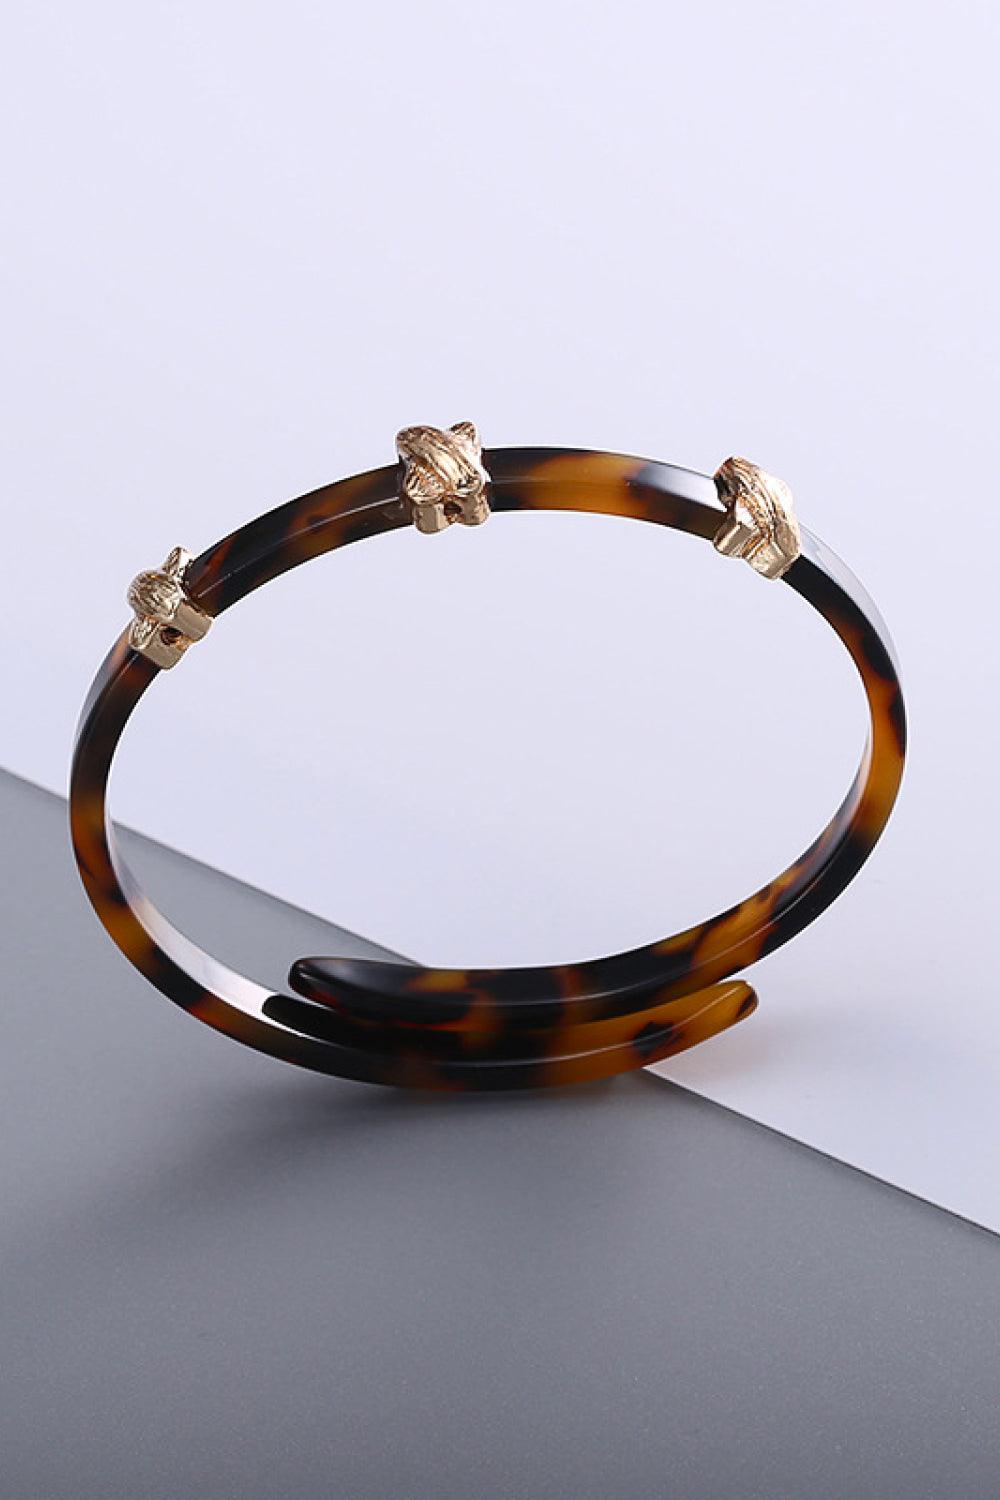 Complete Your Look with a Stylish Faux Tortoise Shell Bypass Bracelet